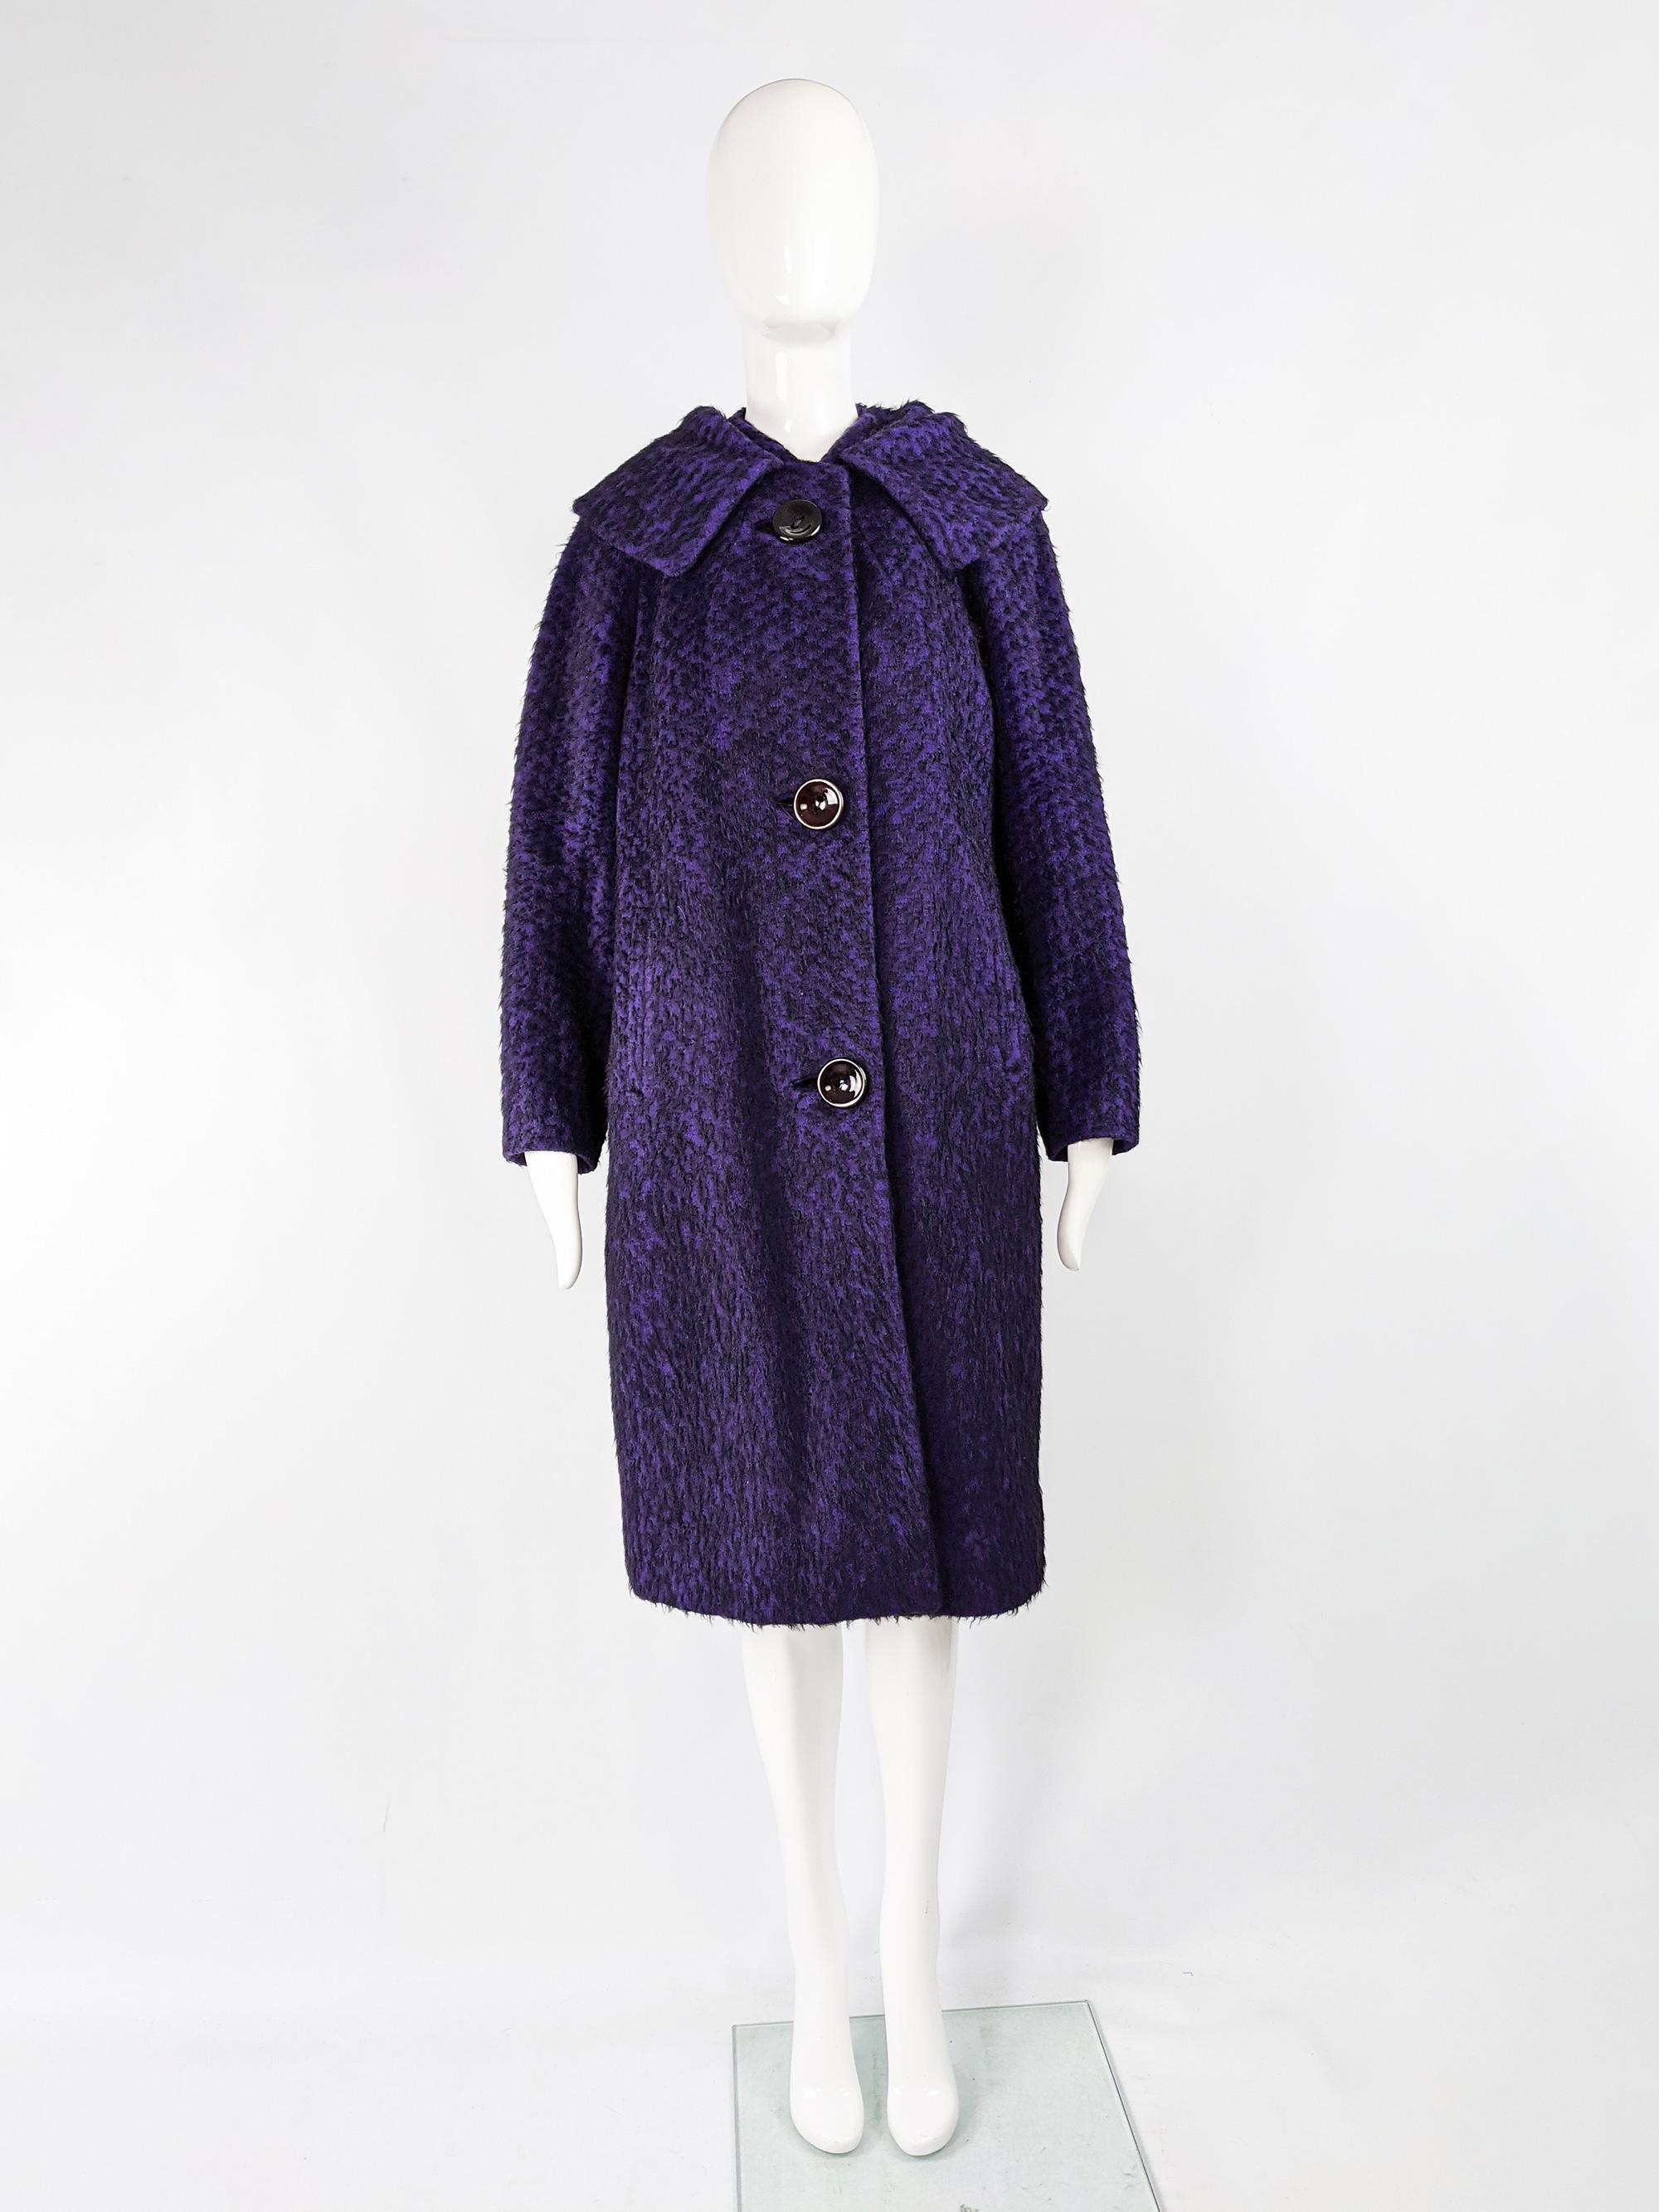 A stunning vintage womens oversized cocoon coat from the late 1950s by Seigal. In a purple and black fuzzy wool fabric with large, dramatic buttons and a huge collar. The oversized, swing style fit creates such a glamorous silhouette and feels so